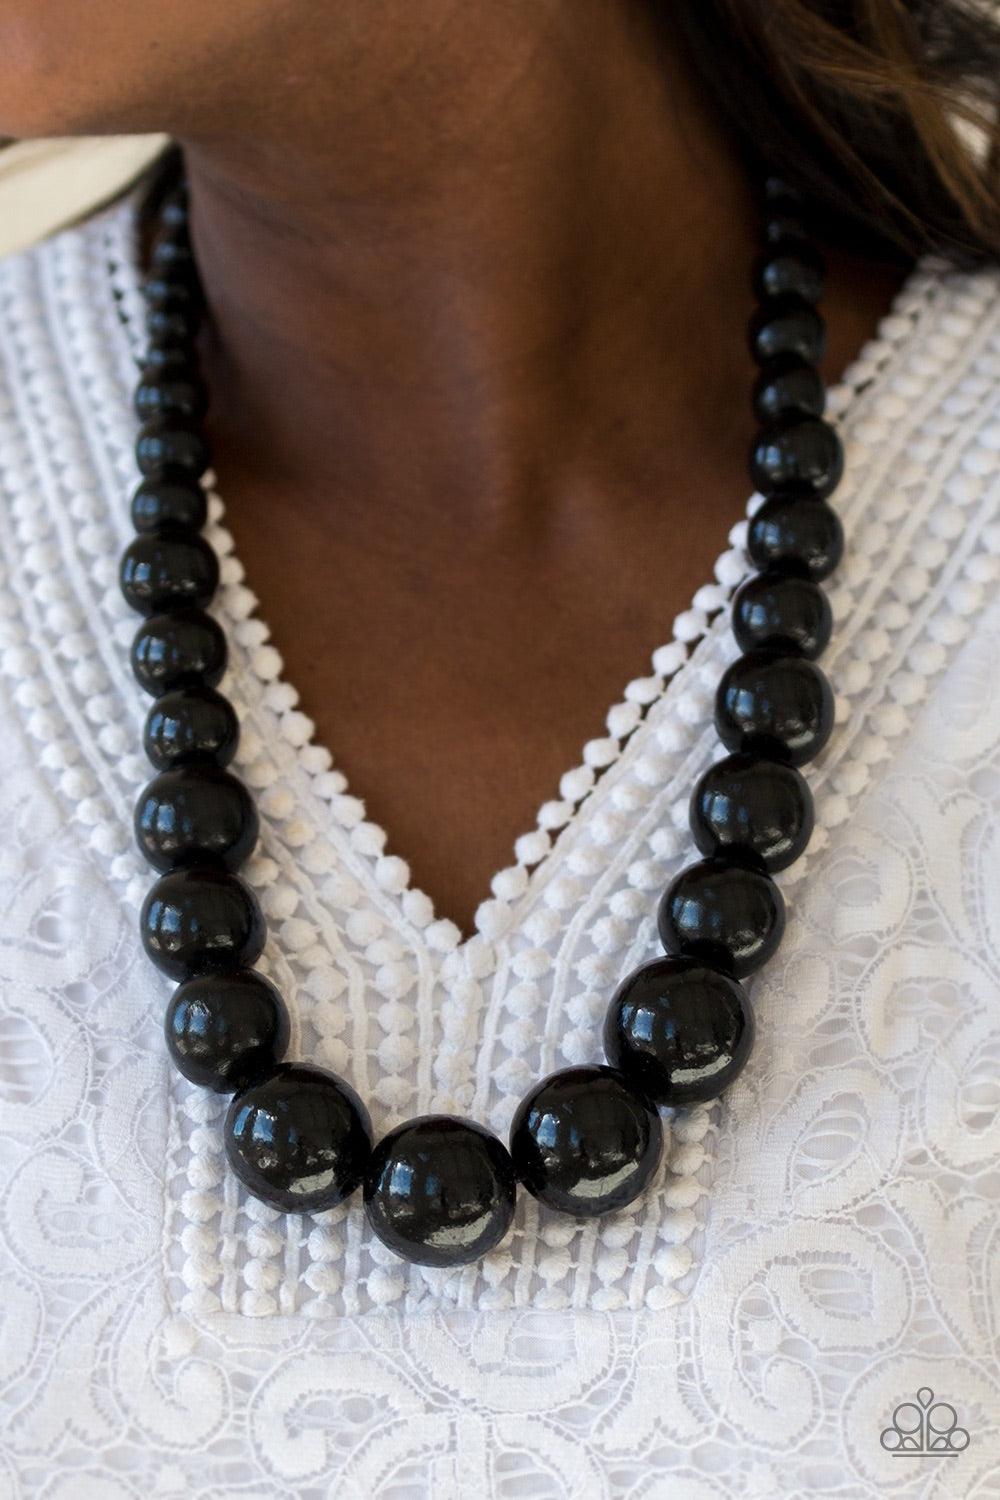 Paparazzi Accessories Effortlessly Everglades - Black Gradually increasing in size near the center, refreshing black wooden beads are threaded along a black string for a summery look. Features an adjustable sliding knot closure. Jewelry